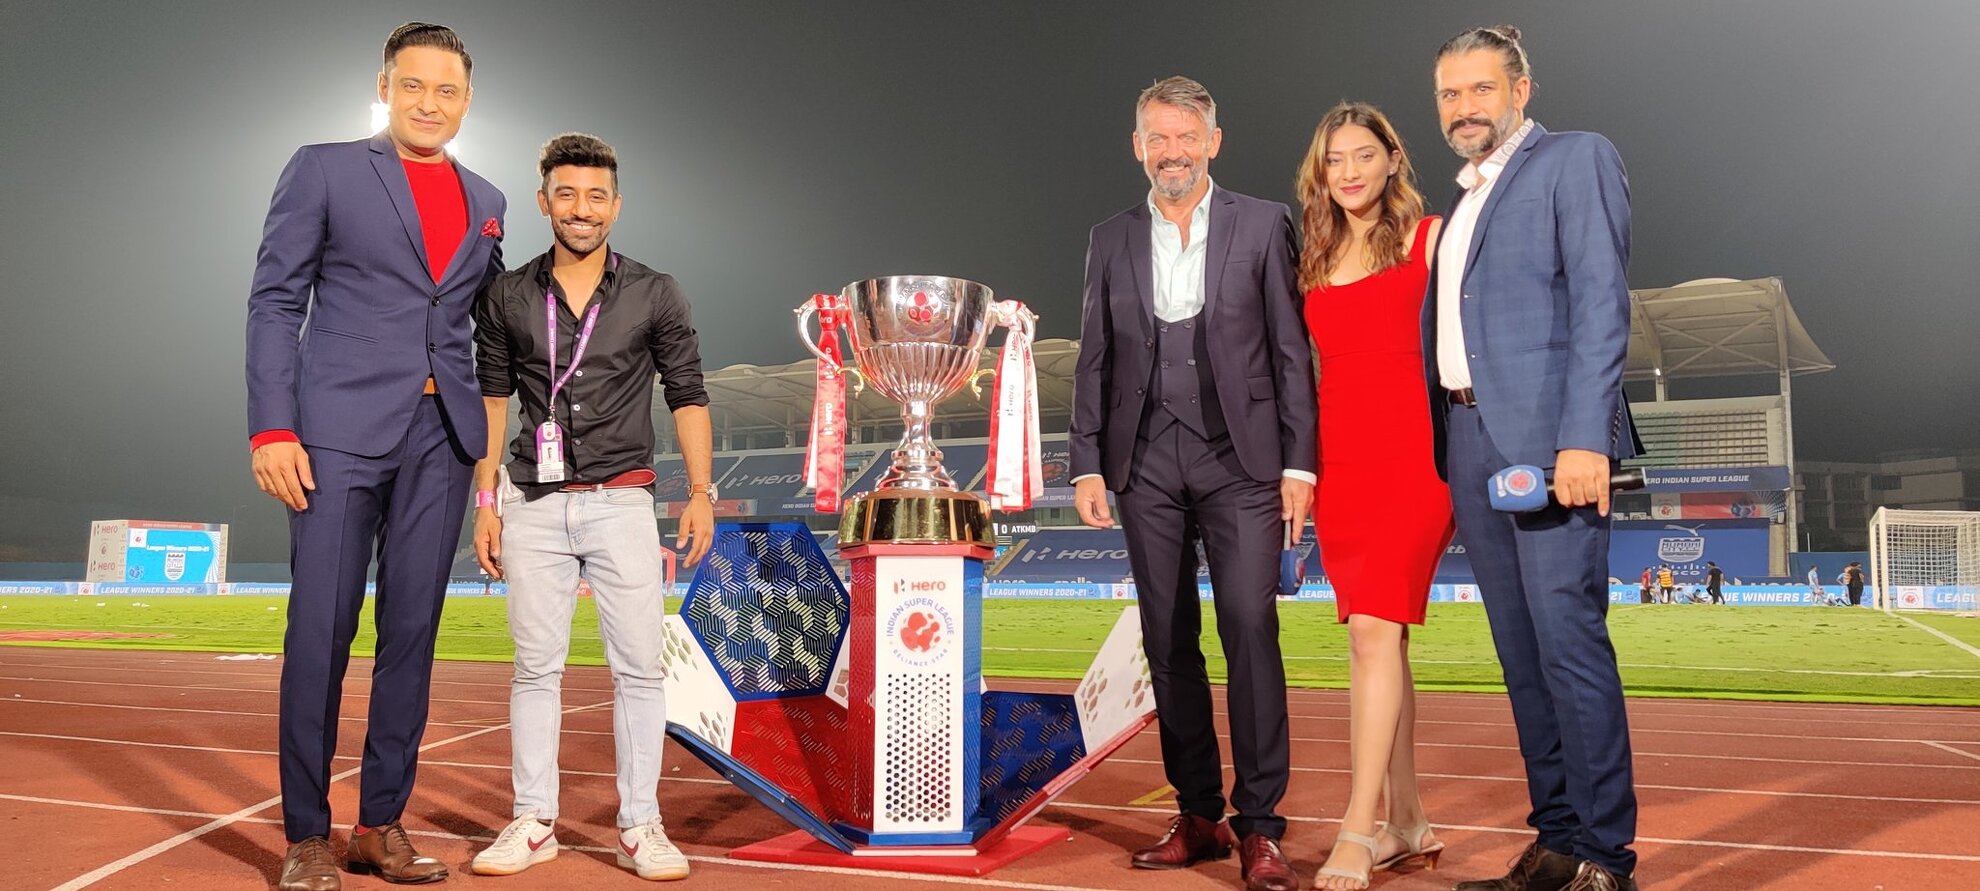 Indian football broadcasters